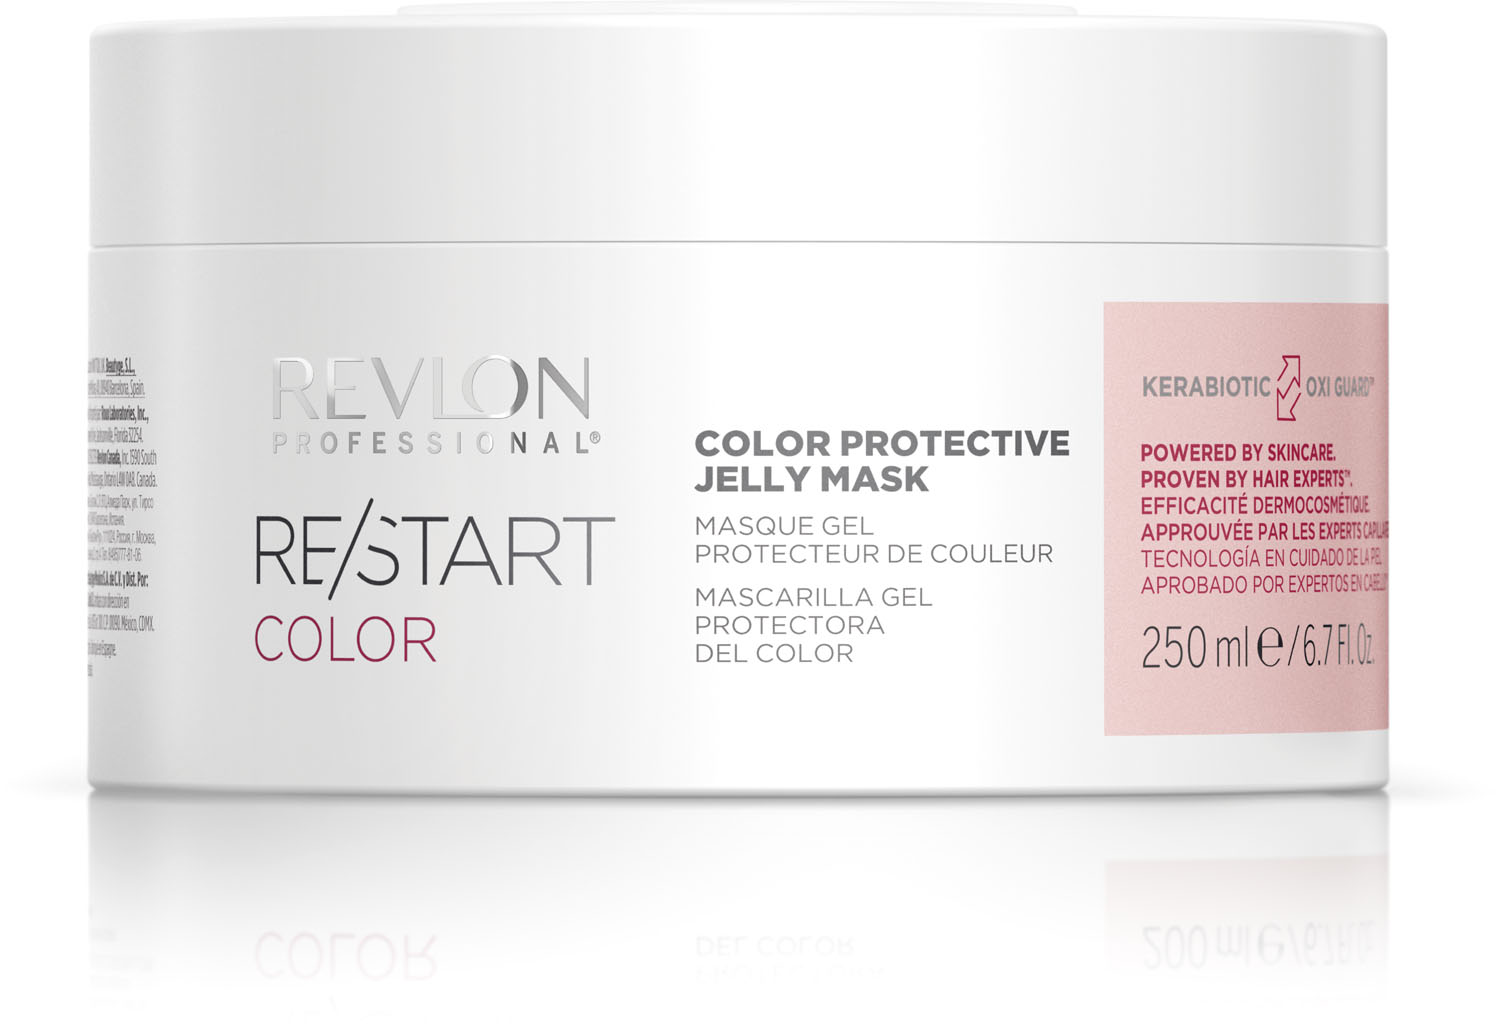  Revlon Professional Re/Start Color Protective Jelly Mask 250 ml 